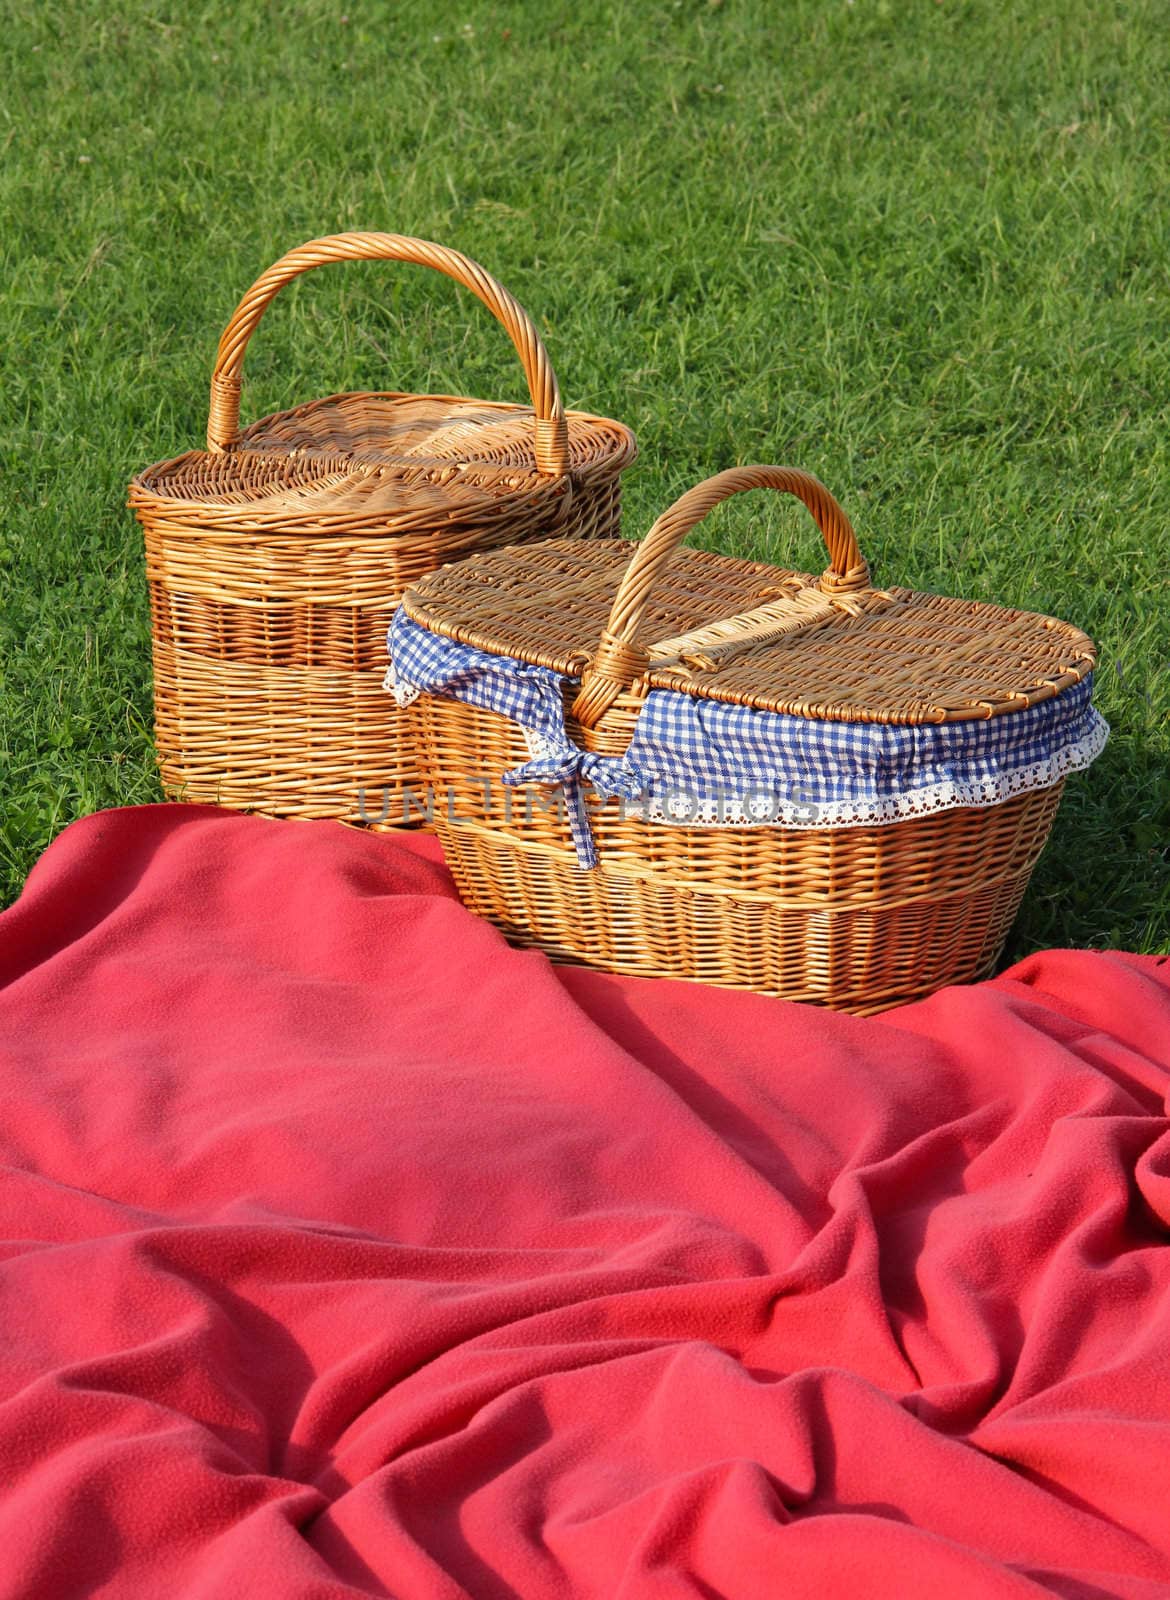 Picnic baskets and blankets in the grass.